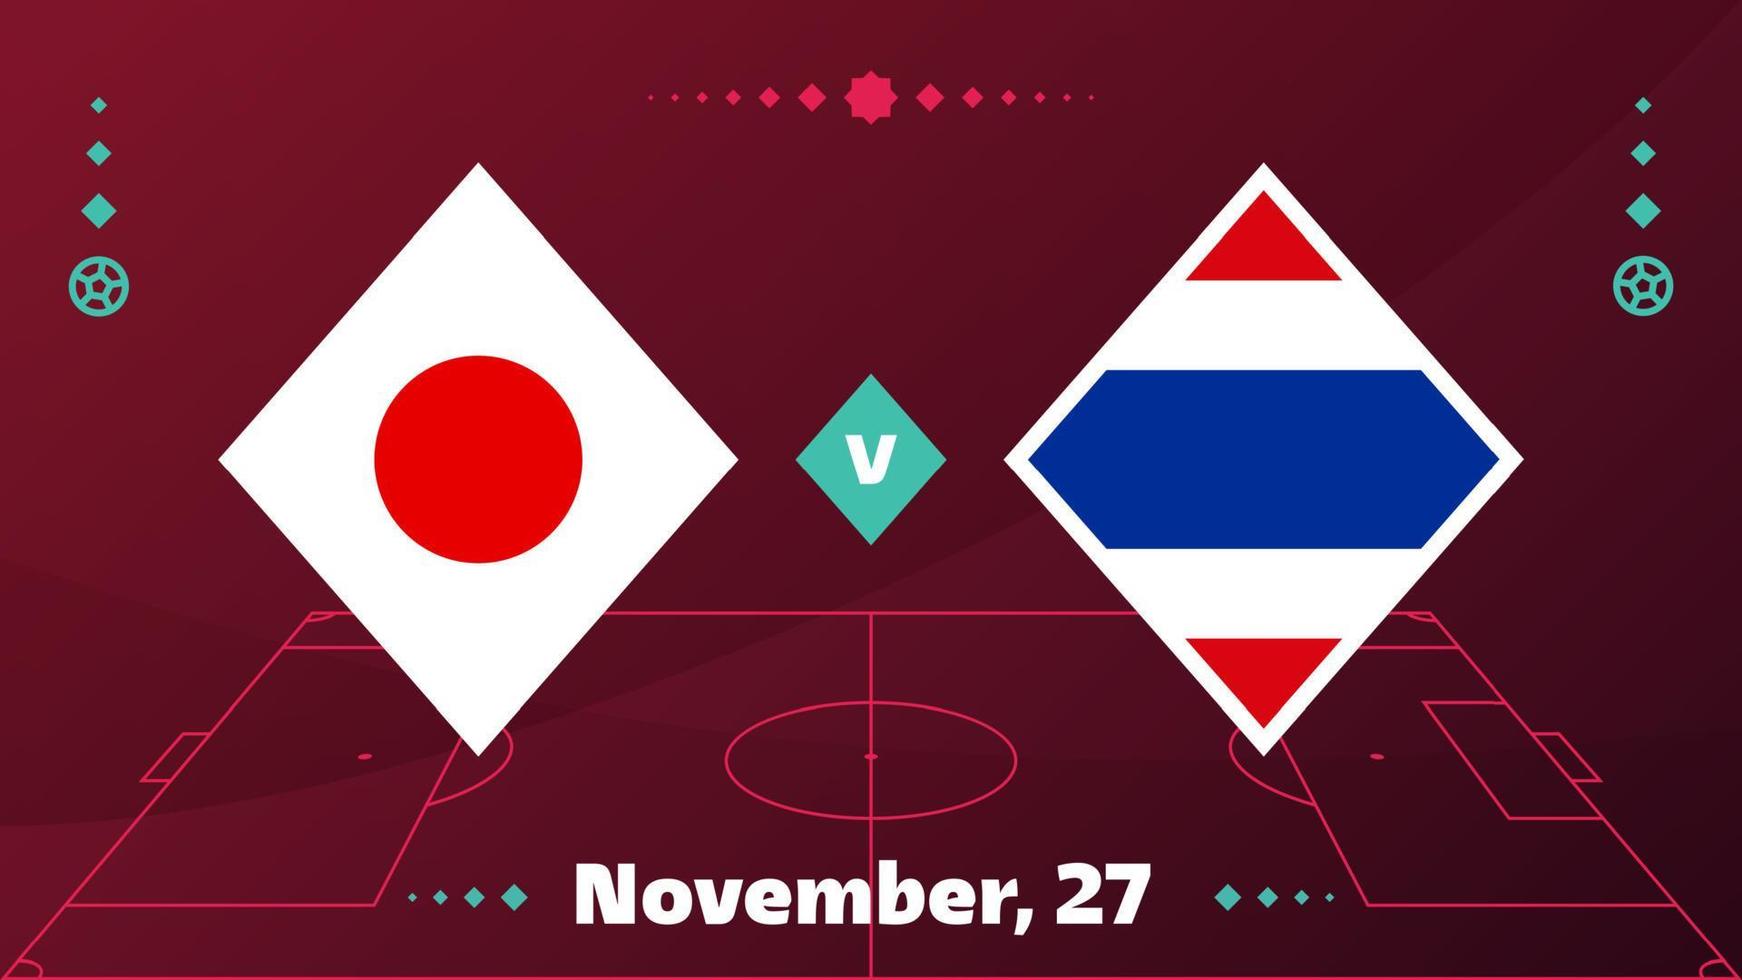 japan vs costa rica match. Football 2022 world championship match versus teams on soccer field. Intro sport background, championship competition final poster, flat style vector illustration